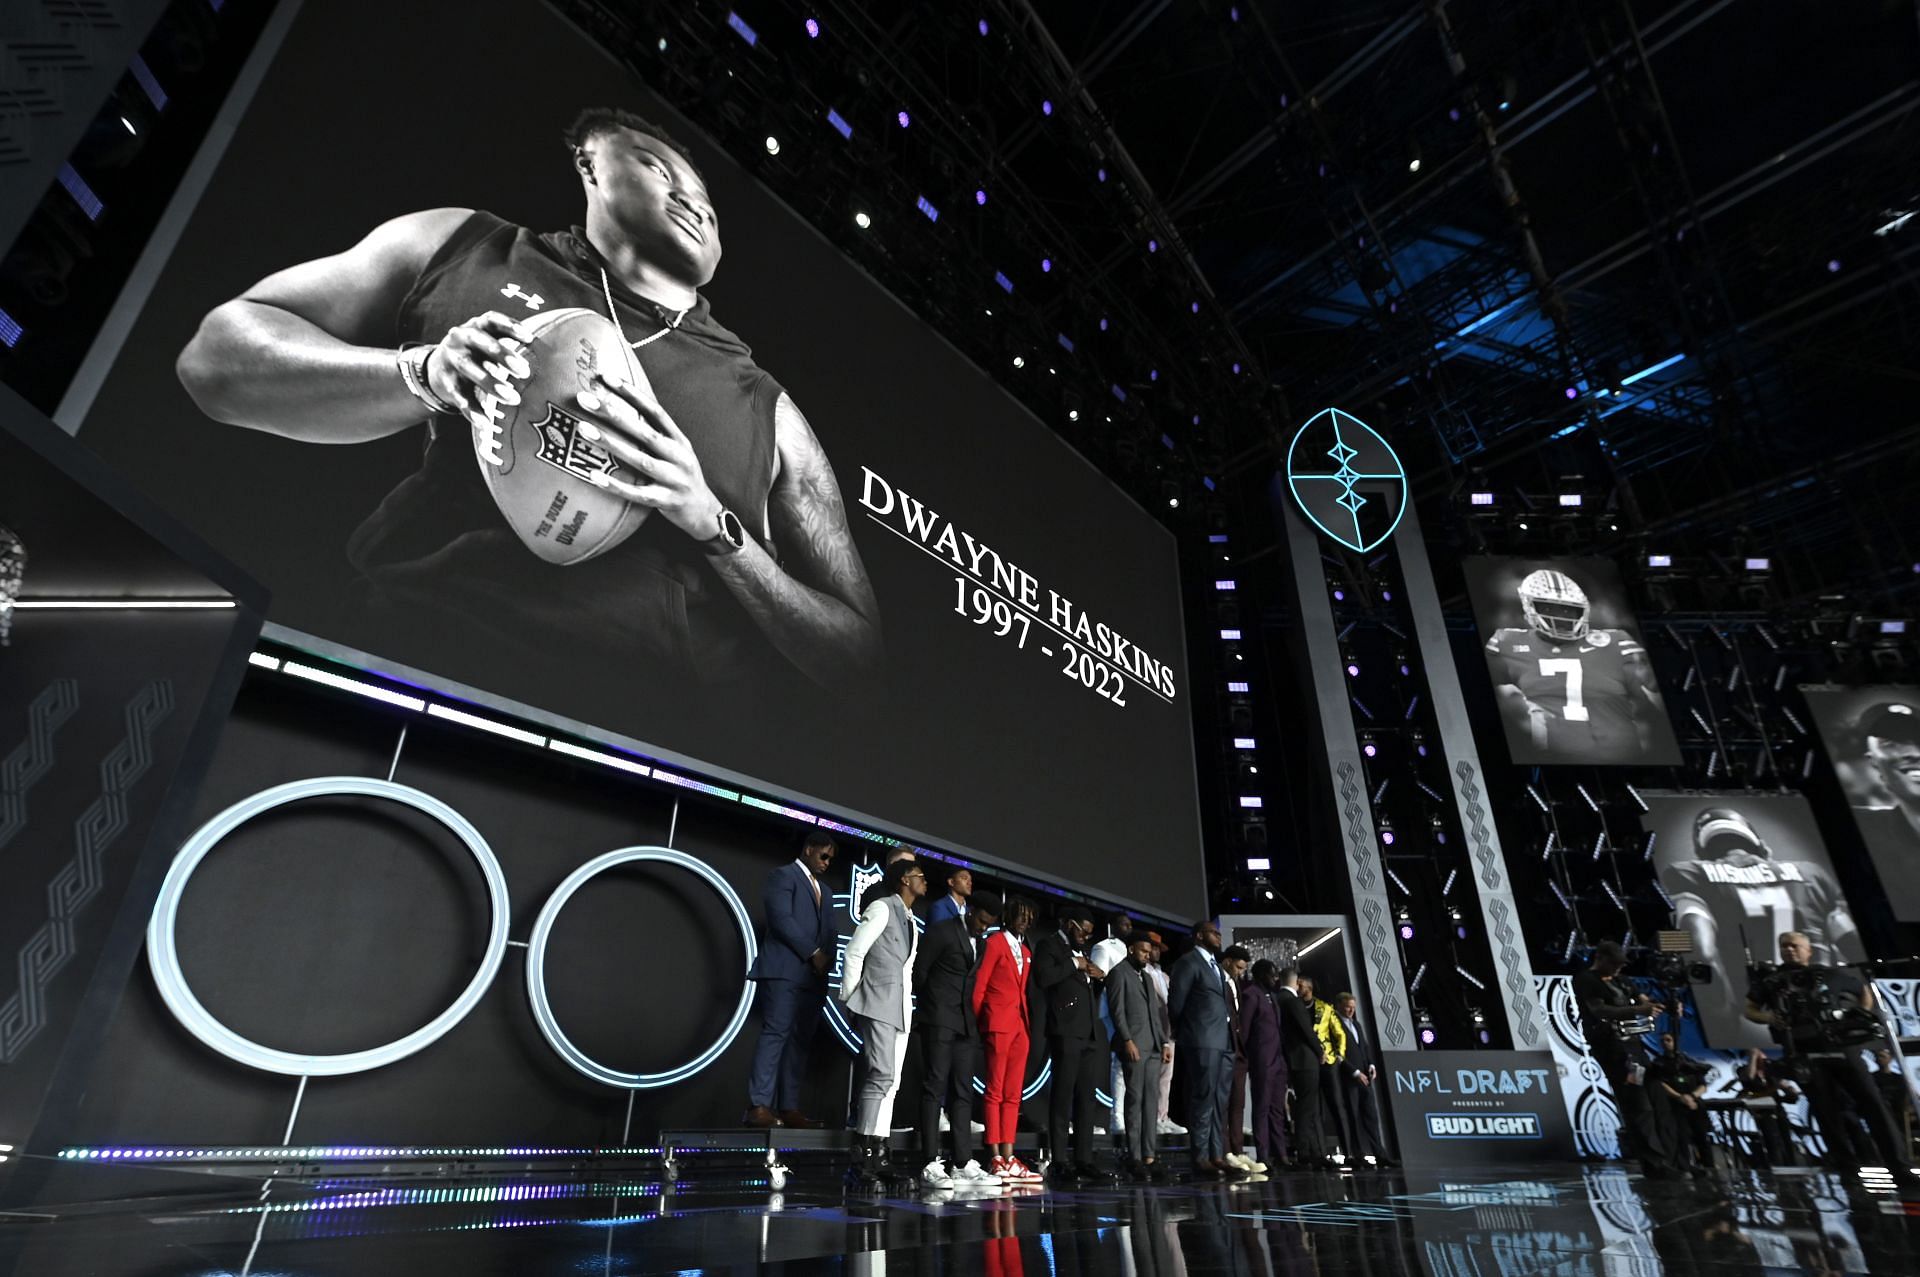 The NFL pays tribute to Dwayne Haskins at the 2022 Draft